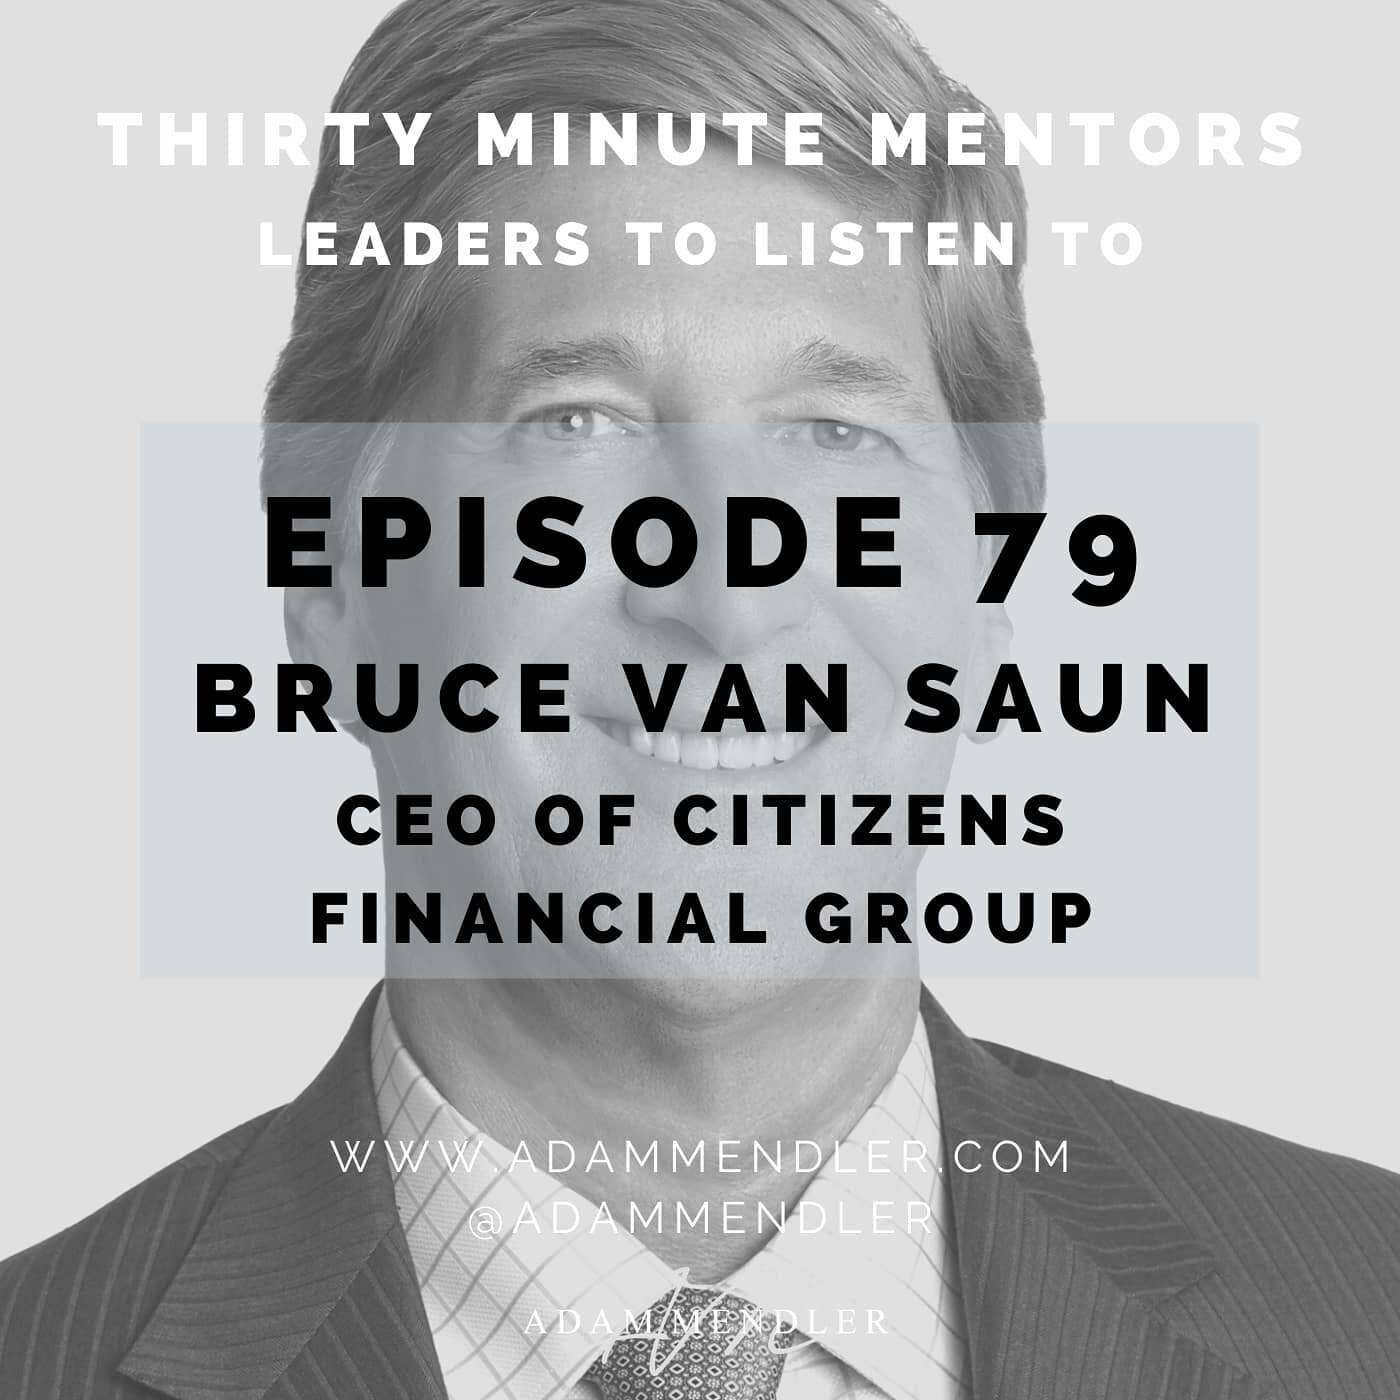 A Fortune 500 CEO, Bruce Van Saun has been a C-level executive at major financial institutions for the past three decades and led @citizensbank through the largest IPO in the history of any U.S. commercial bank. Bruce joined me on Episode 79 of Thirt